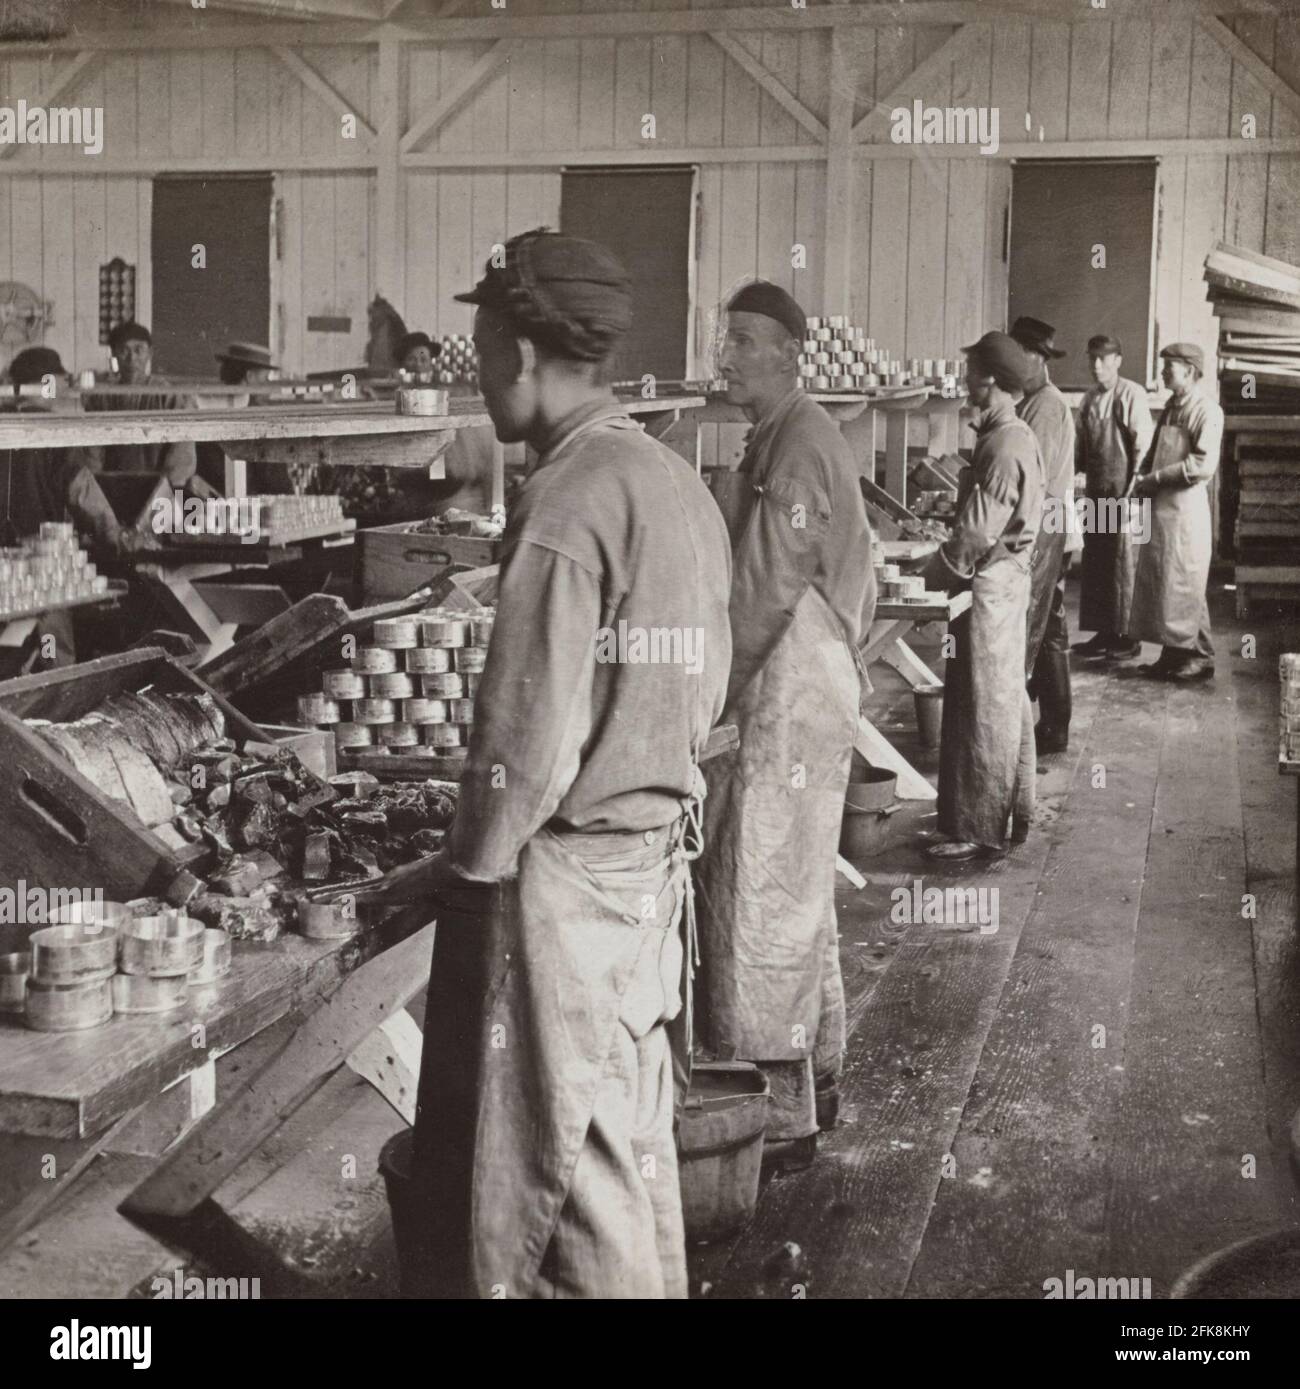 Chinamen filling the cans-interior of a canning establishment, Astoria, Ore., USA, 1905 Stock Photo